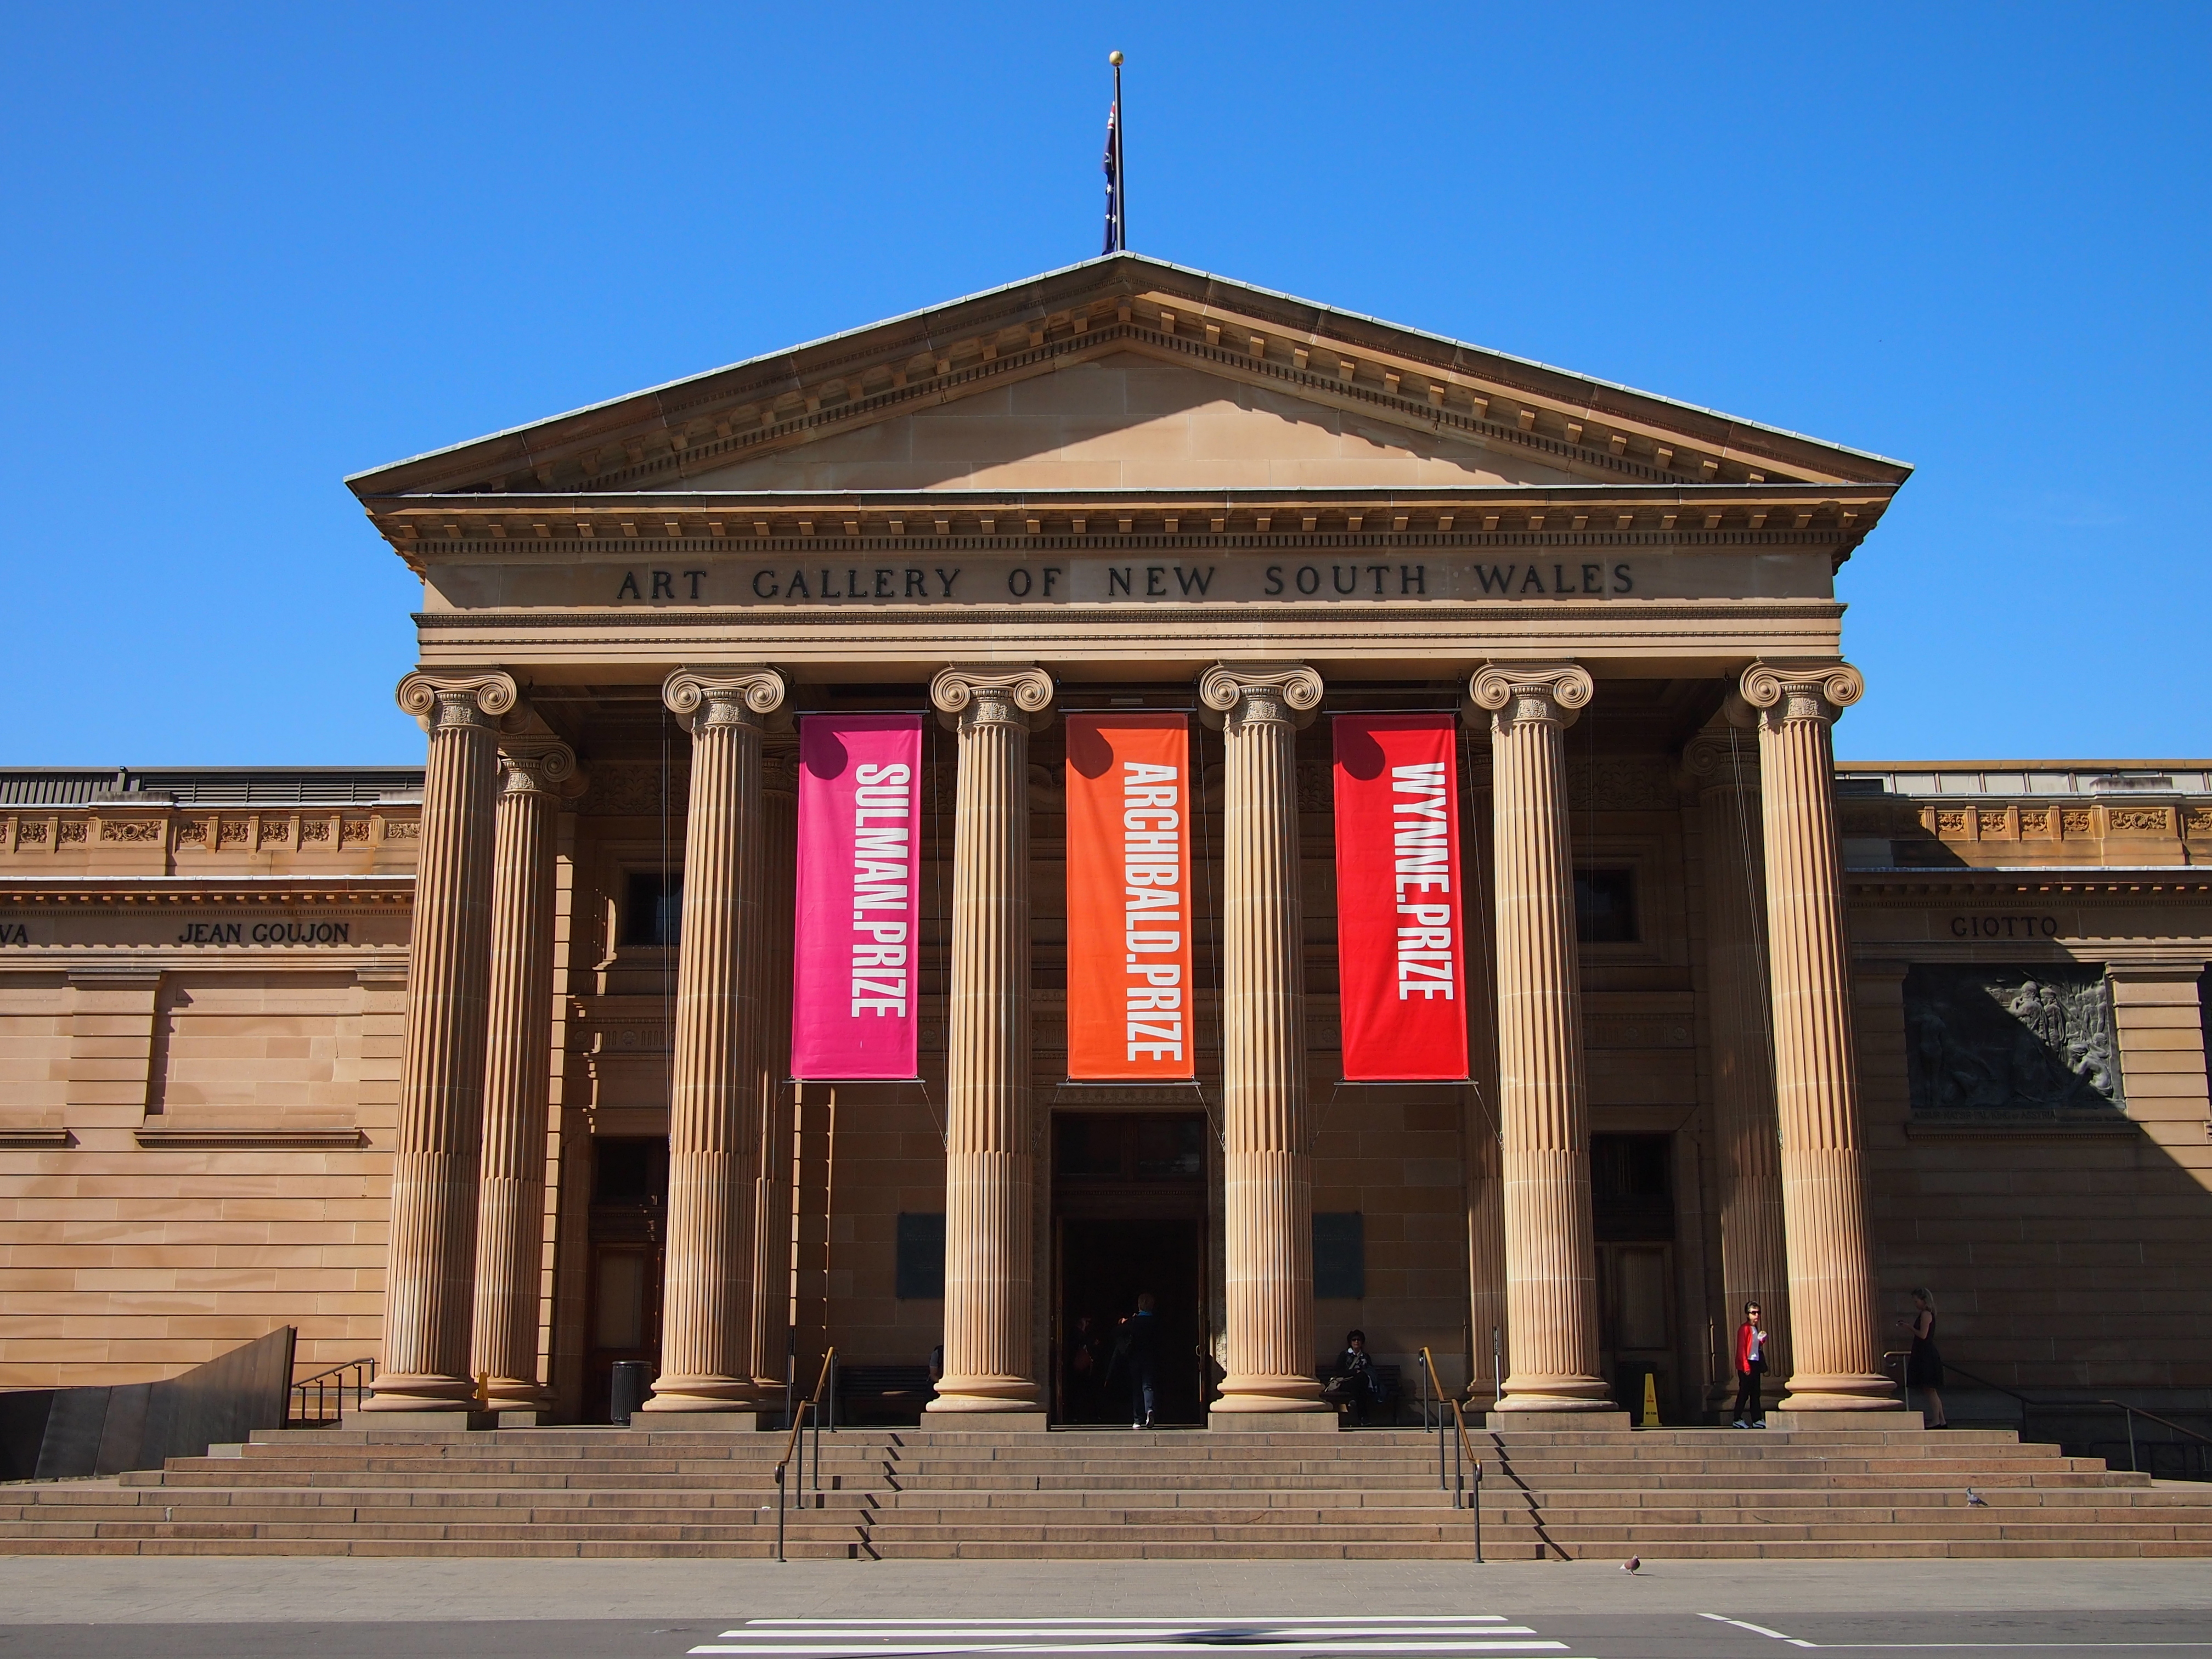 File:Art Gallery of NSW entrance May 2013.jpg - Wikimedia Commons